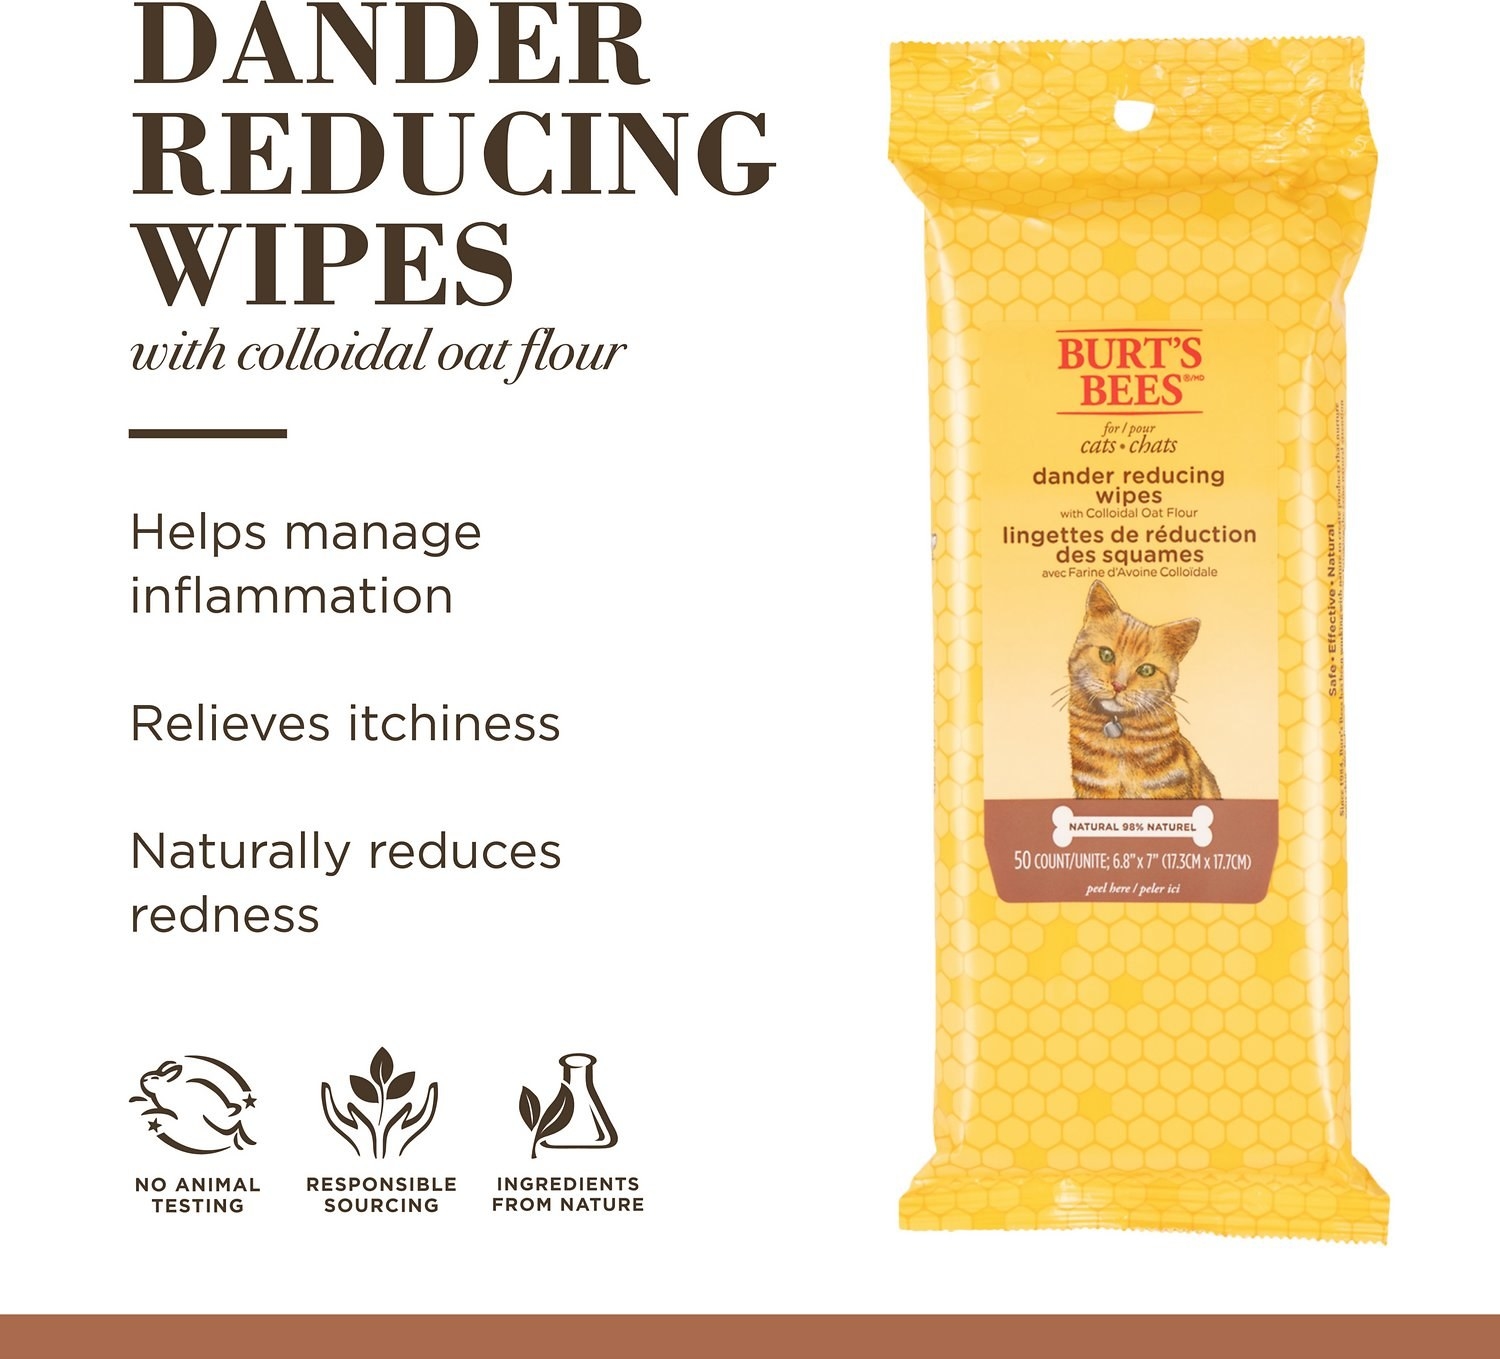 infographic showing the wipes and listing their benefits, which include &quot;helps manage inflammation, relieves itchiness, and naturally reduces redness&quot;